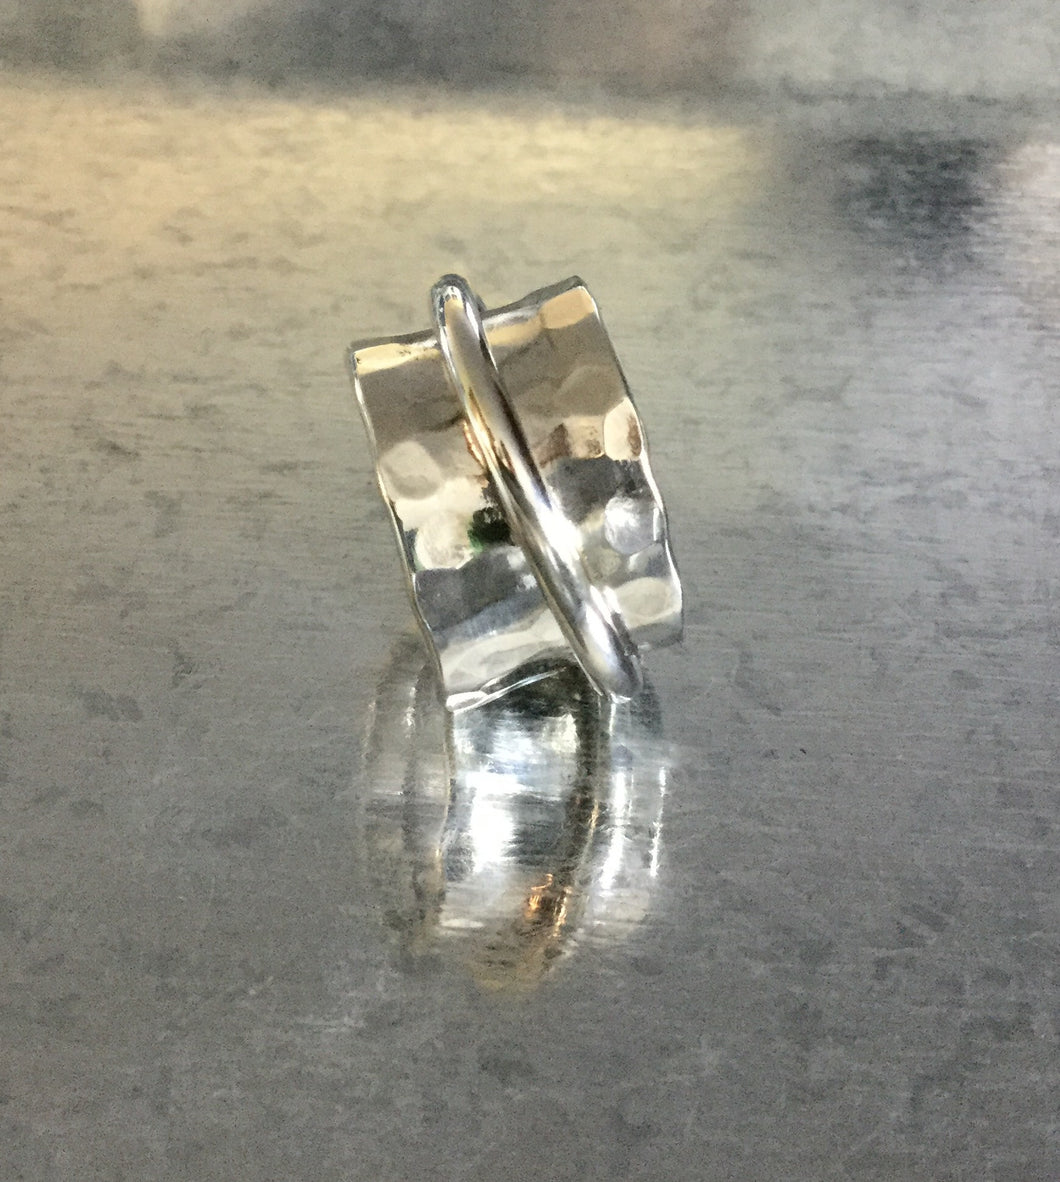 Hammered Wide Spinner Ring